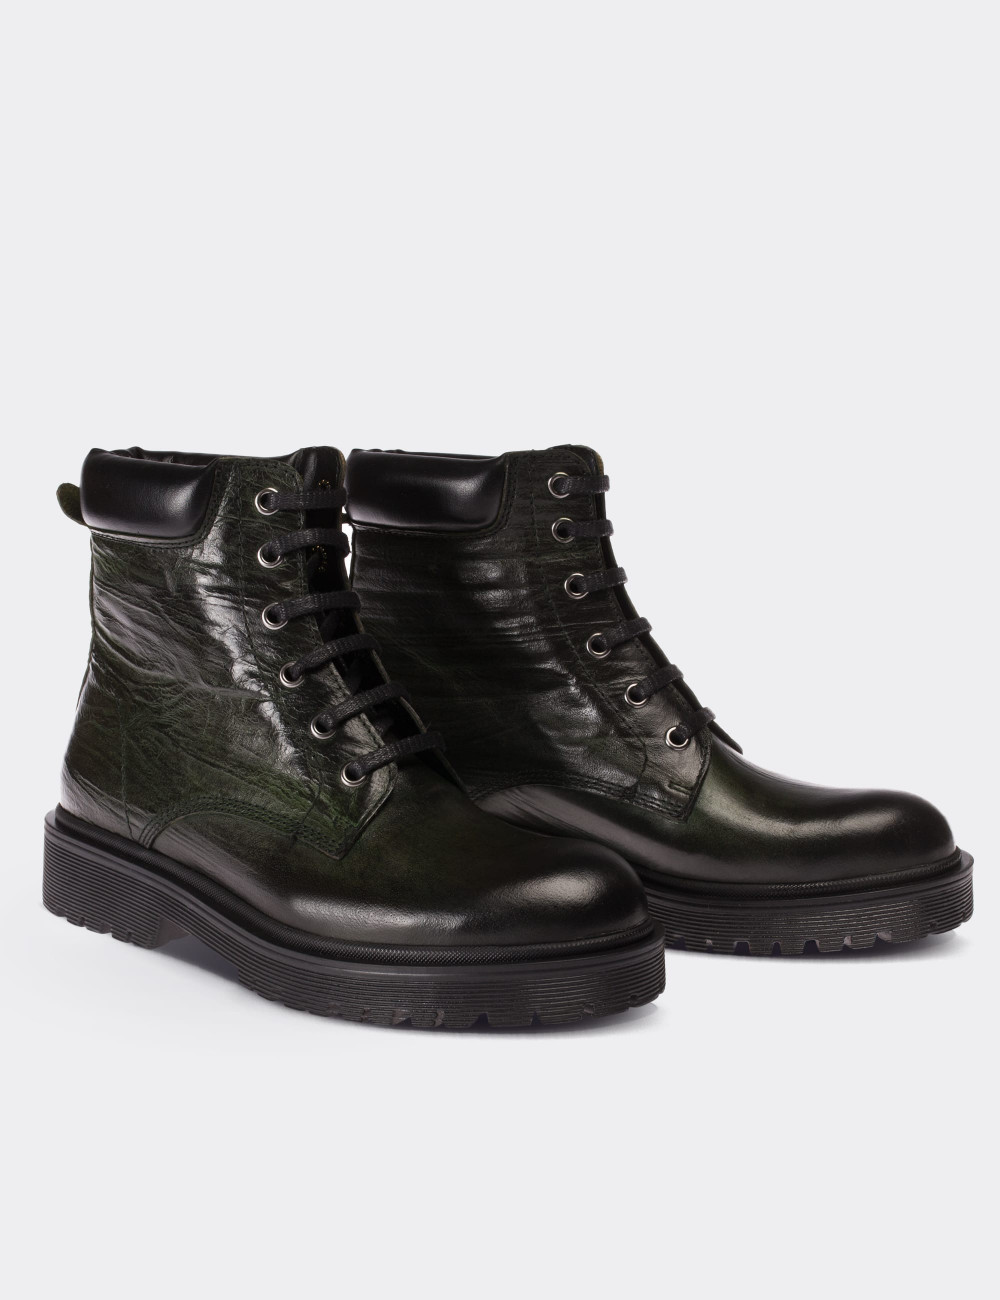 Green  Leather Boots - 01808ZYSLC01